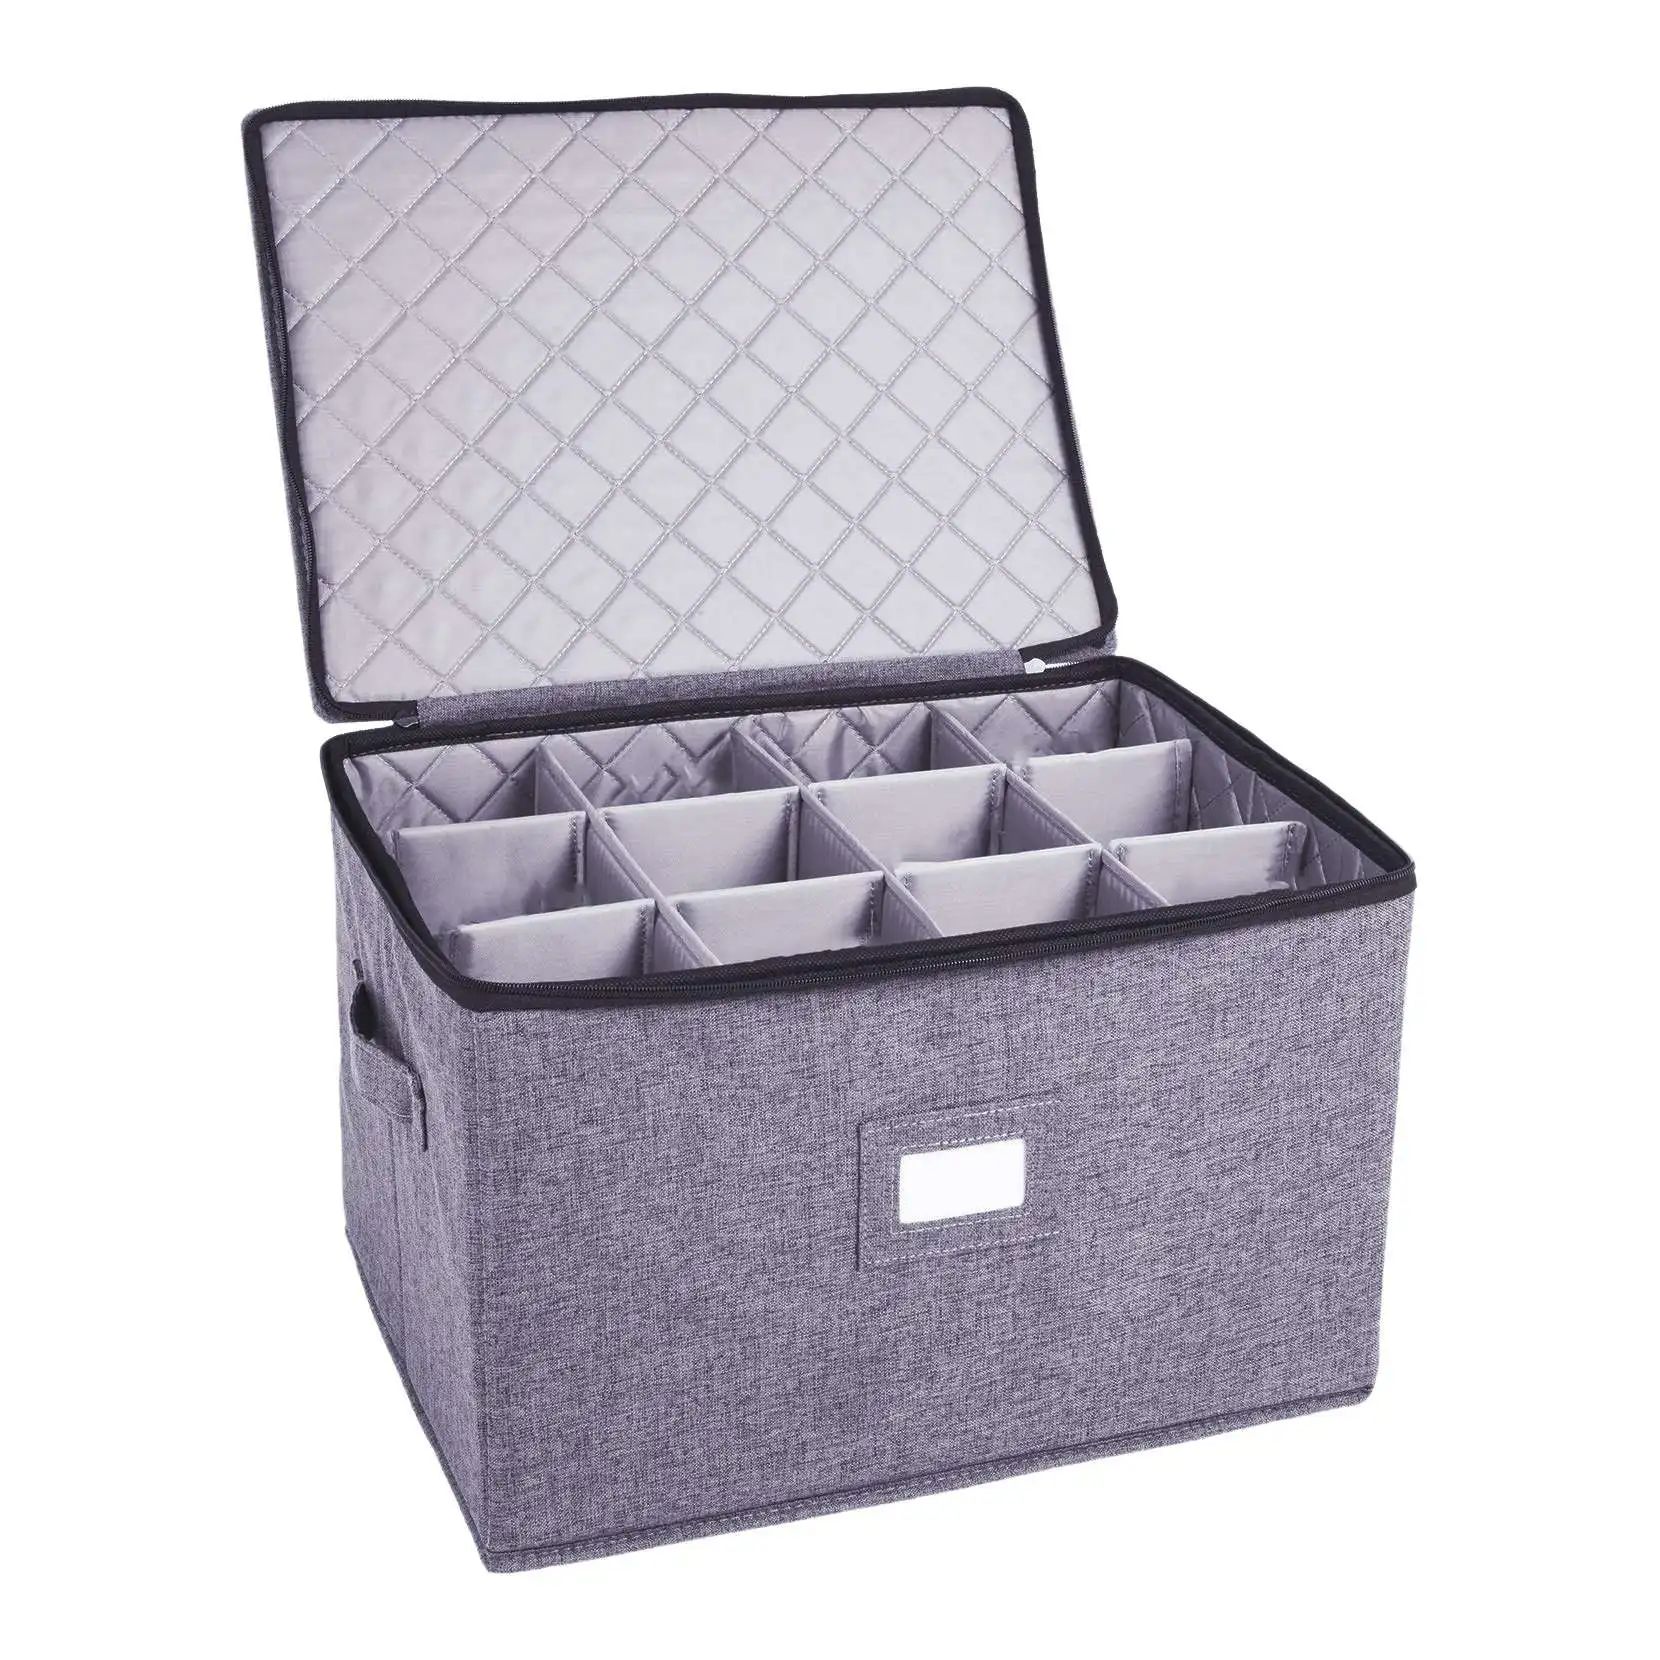 

Wine Glass Storage Holds 12 Wine Glasses or Wine Foldable Storage Box Can Also Be Used for Clothing Storage Organization